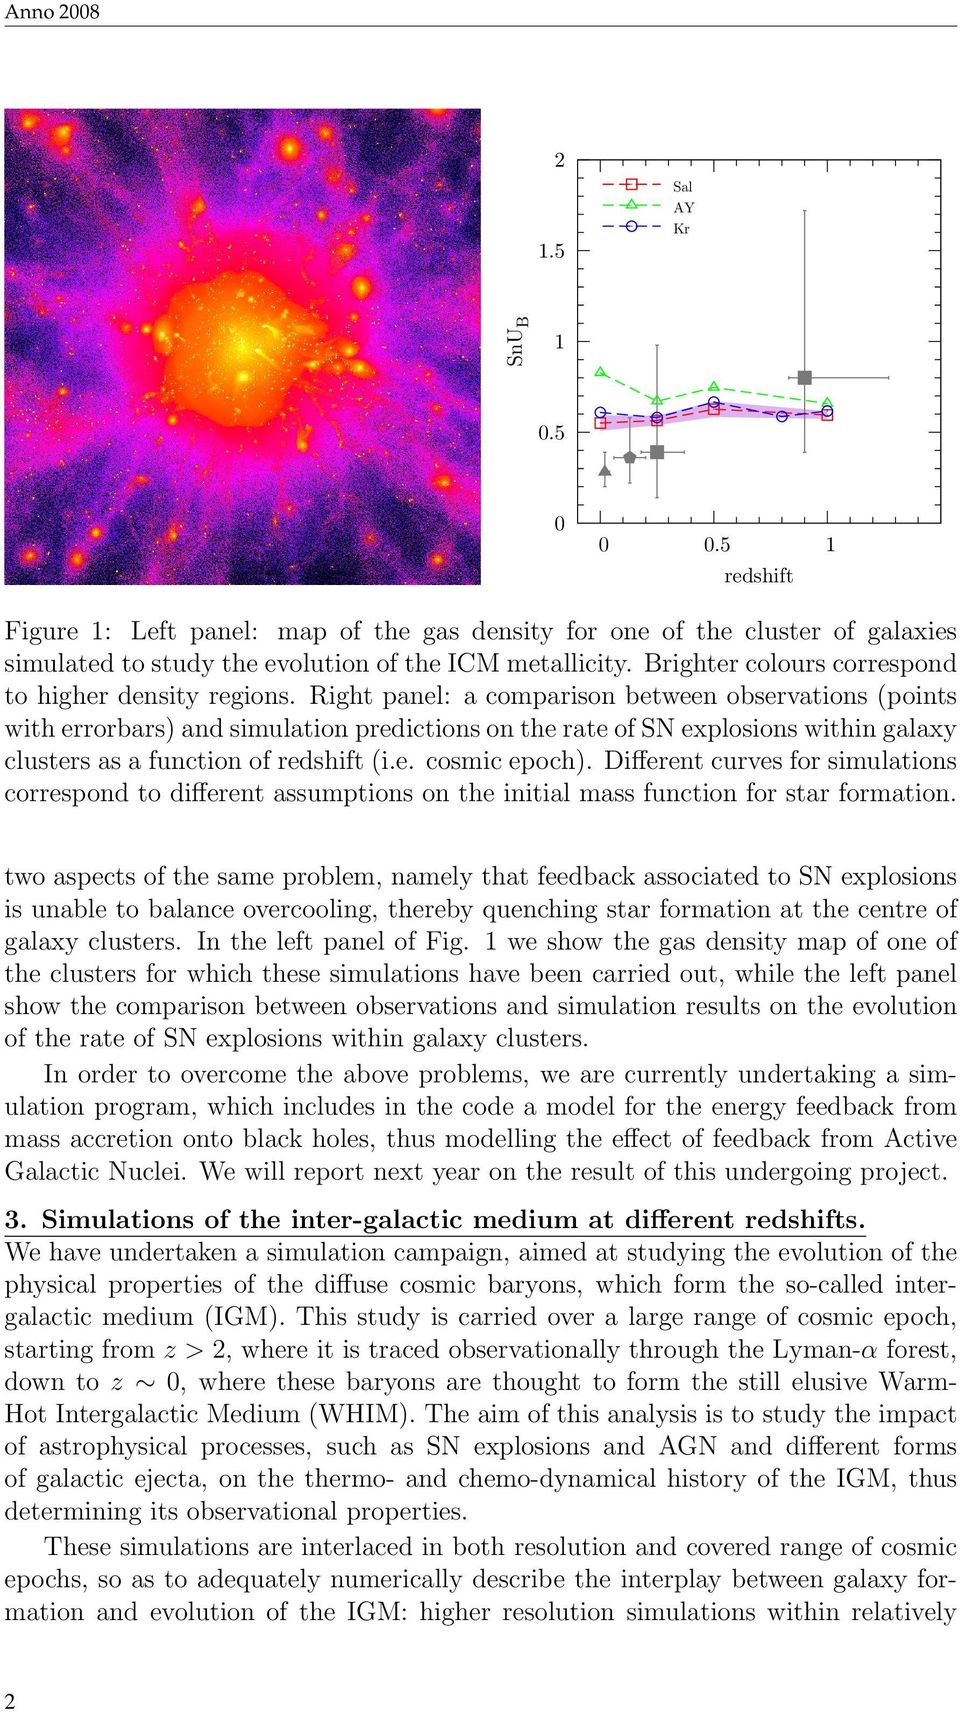 Right panel: a comparison between observations (points with errorbars) and simulation predictions on the rate of SN explosions within galaxy clusters as a function of redshift (i.e. cosmic epoch).